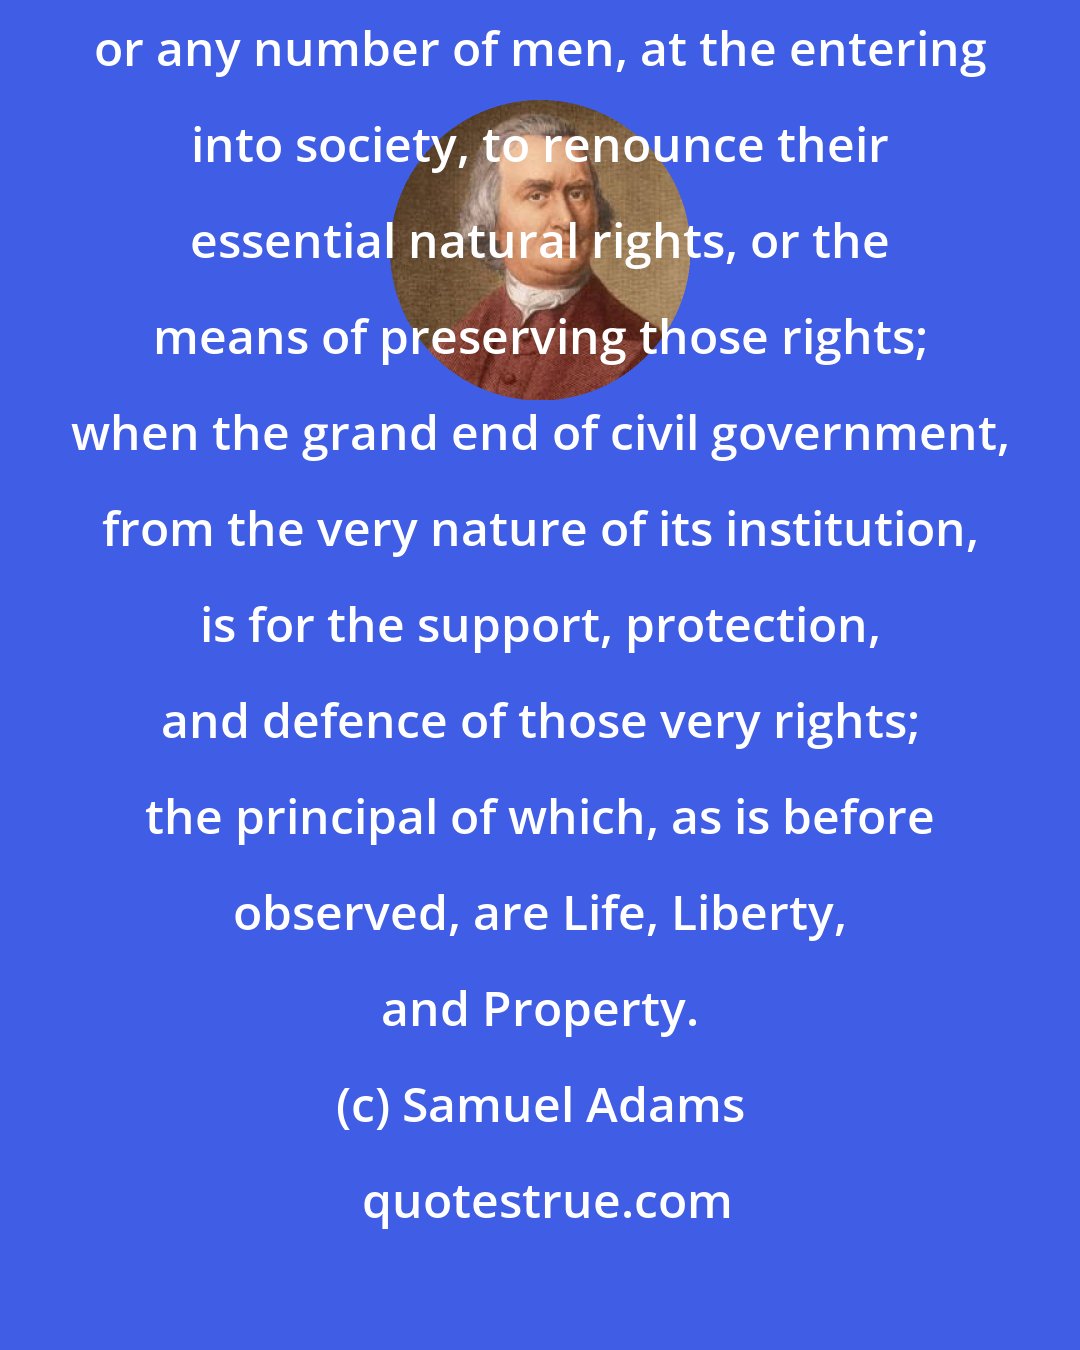 Samuel Adams: In short, it is the greatest absurdity to suppose it in the power of one, or any number of men, at the entering into society, to renounce their essential natural rights, or the means of preserving those rights; when the grand end of civil government, from the very nature of its institution, is for the support, protection, and defence of those very rights; the principal of which, as is before observed, are Life, Liberty, and Property.